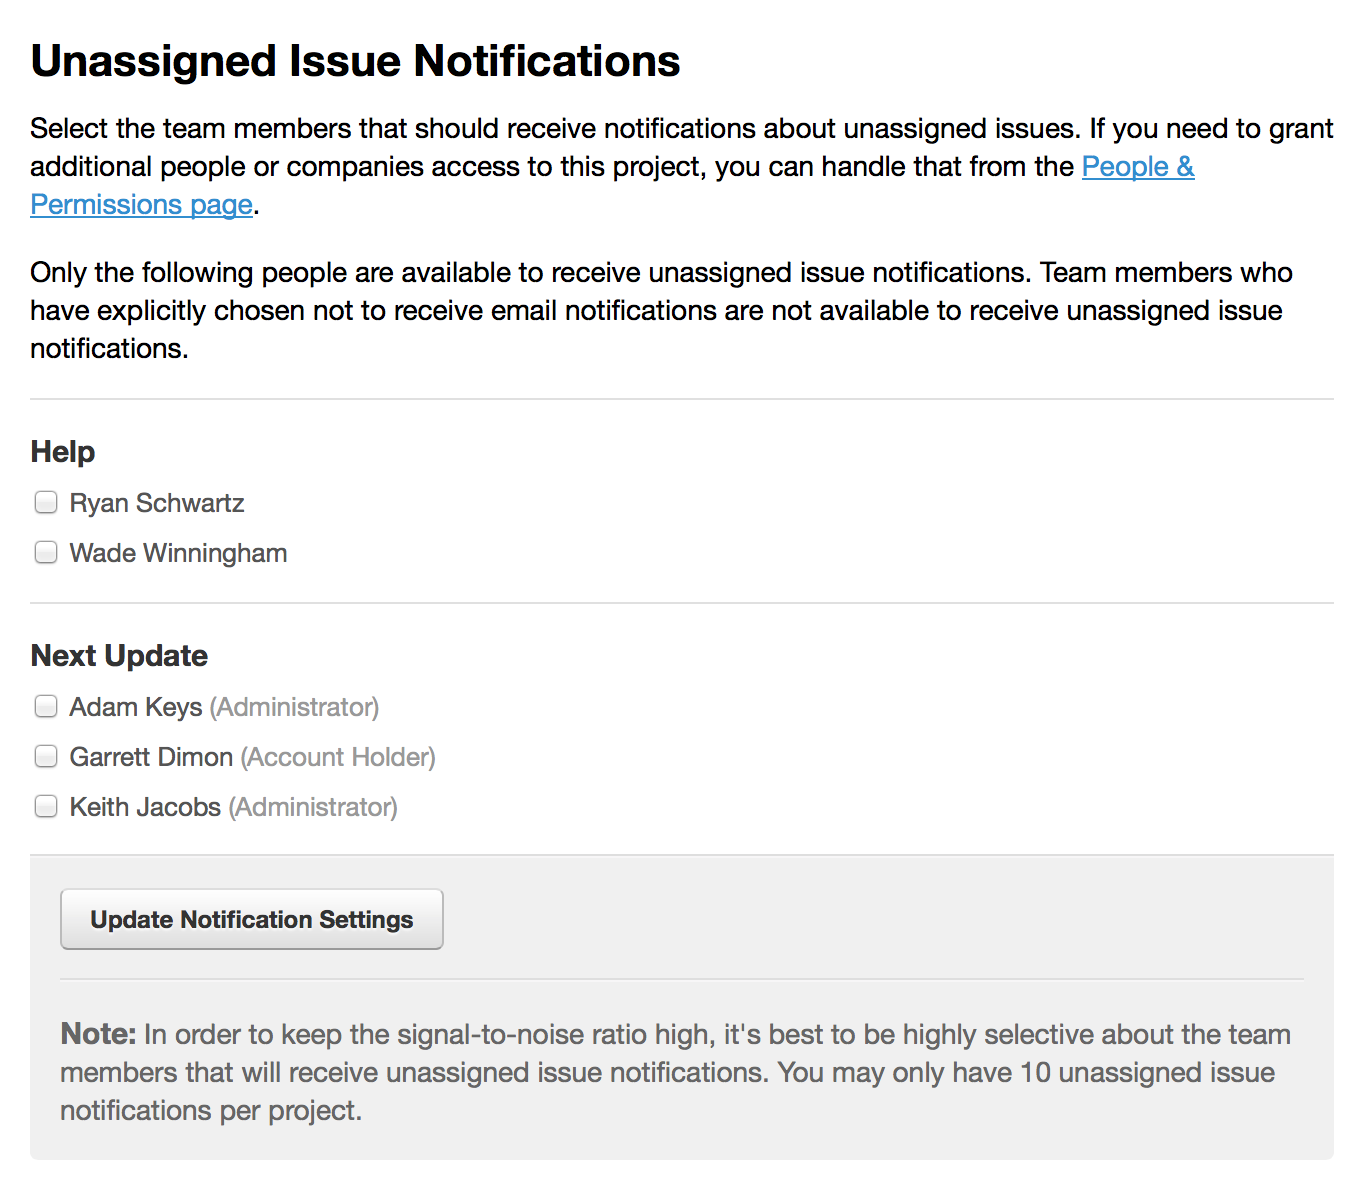 A list of checkboxes of available team members that can receive unassigned issue notifications.